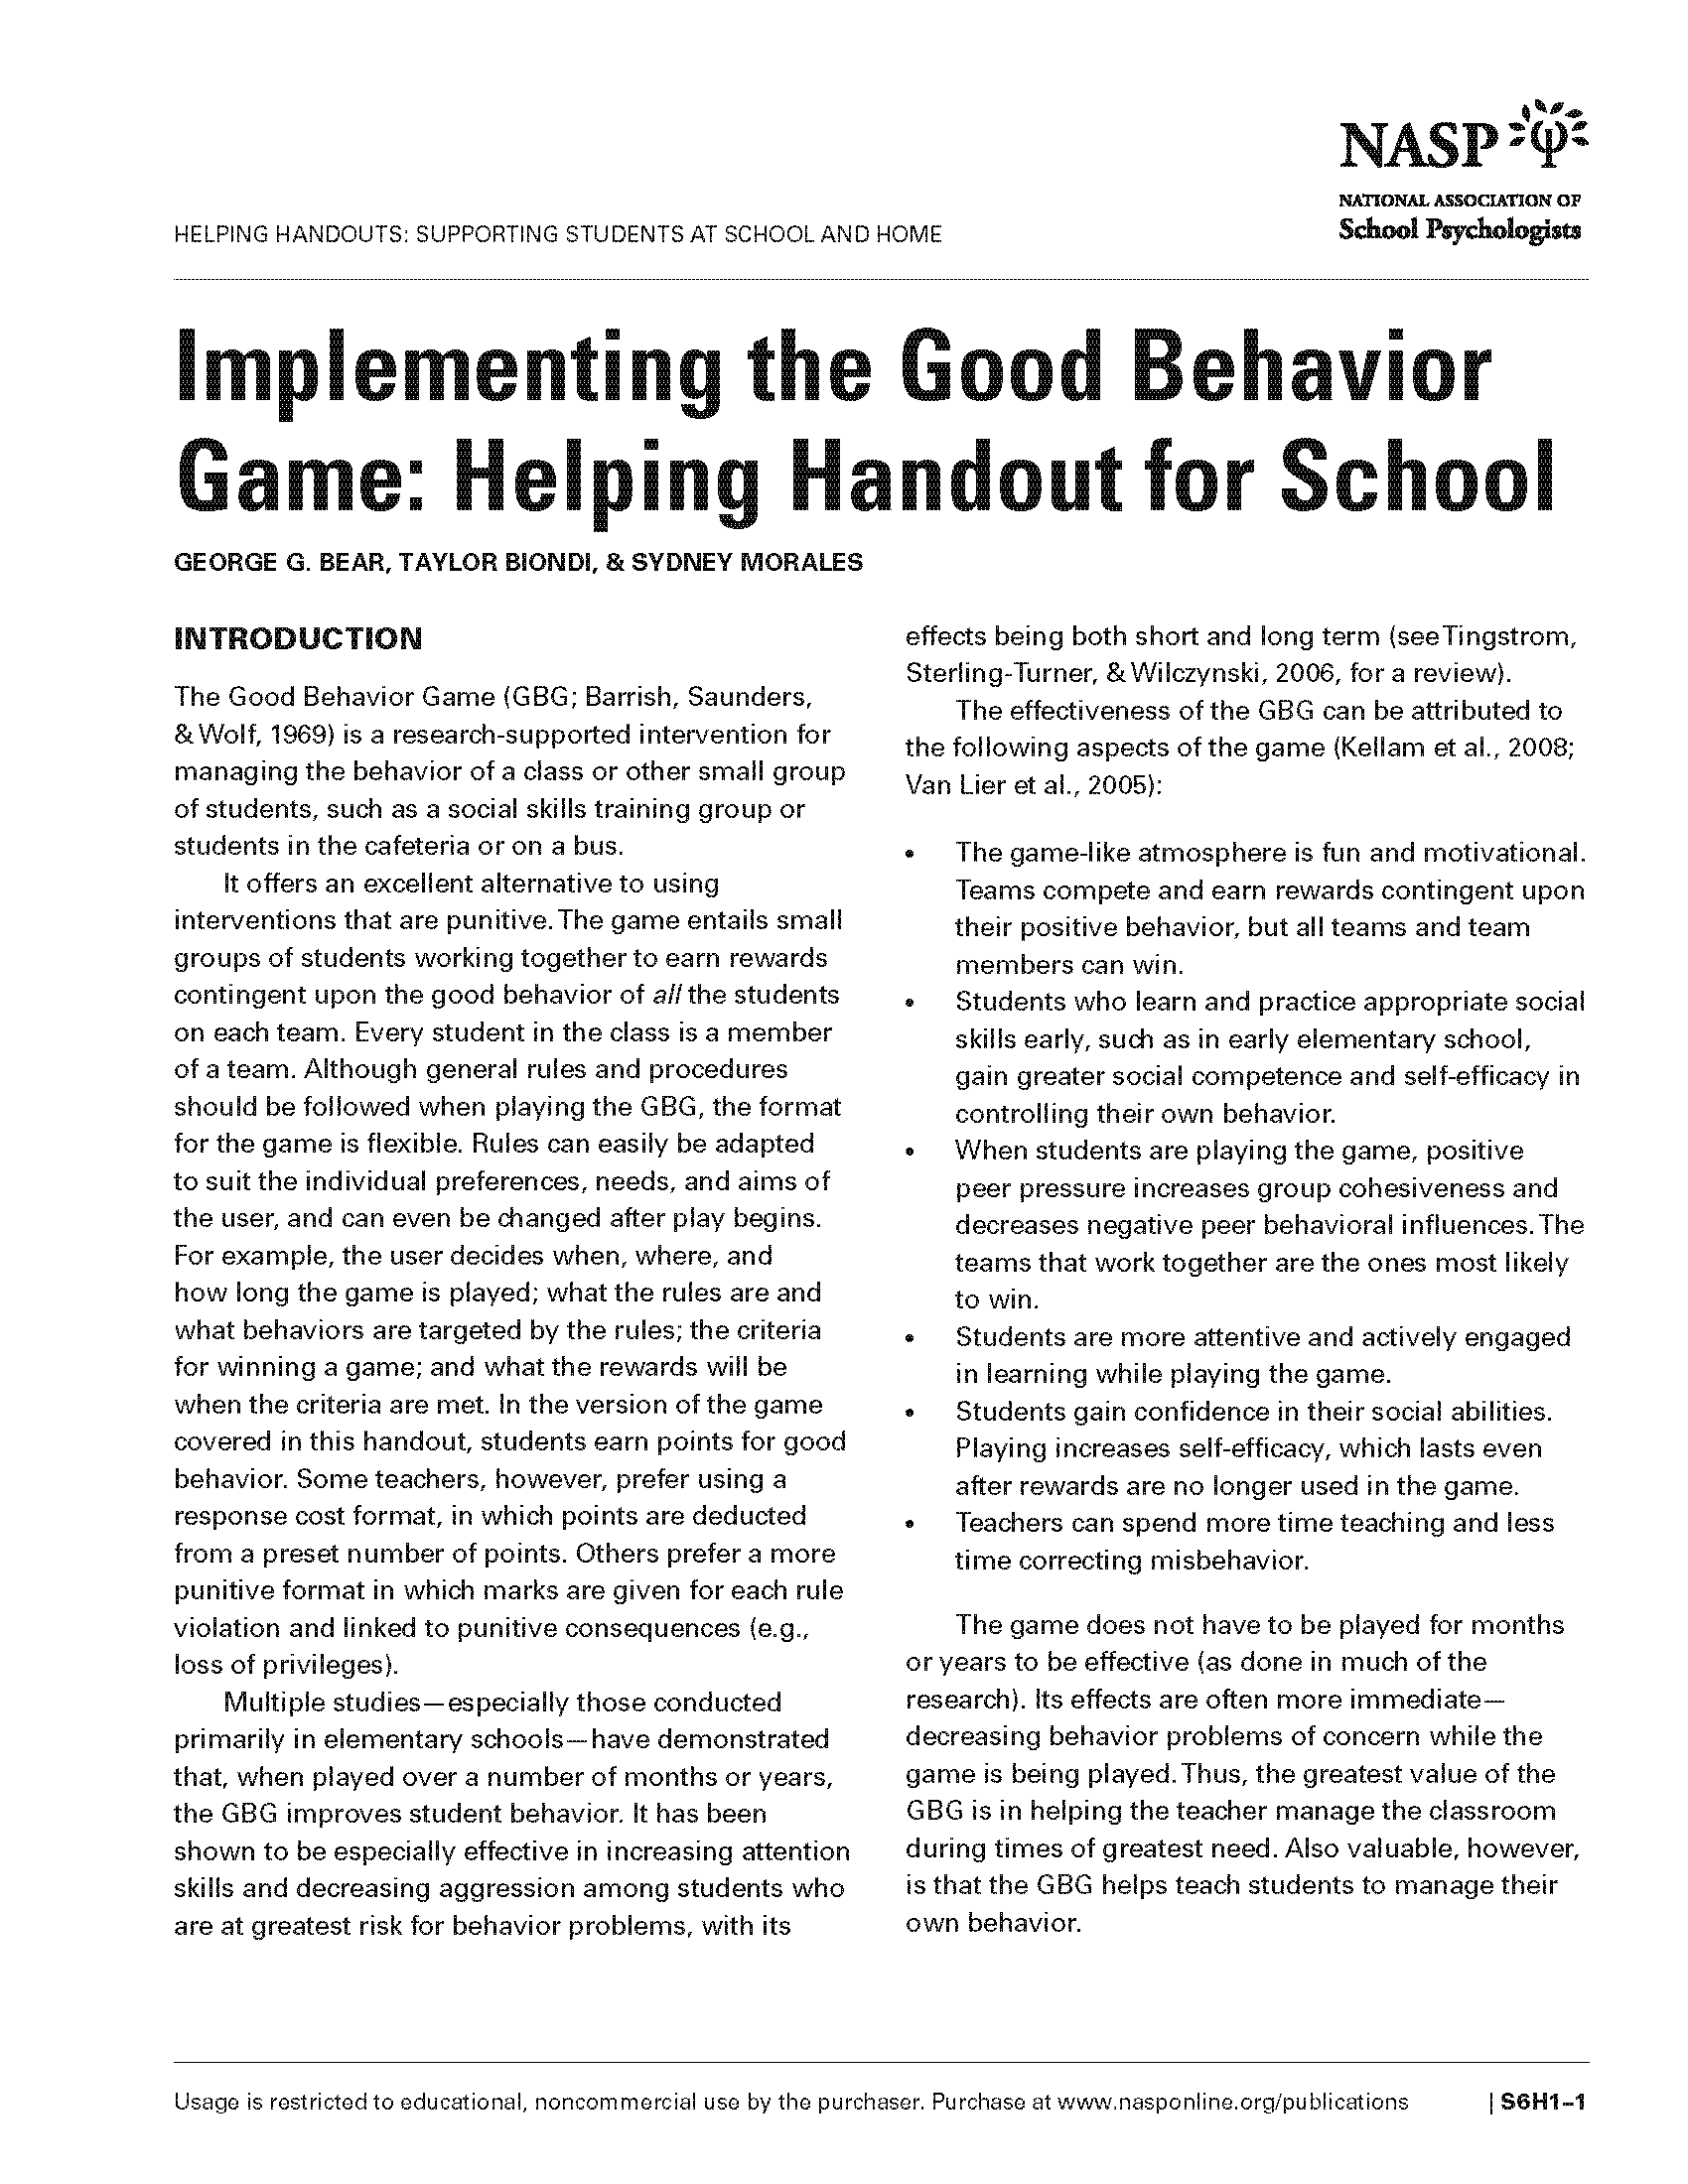 Implementing the Good Behavior Game: Helping Handout for School